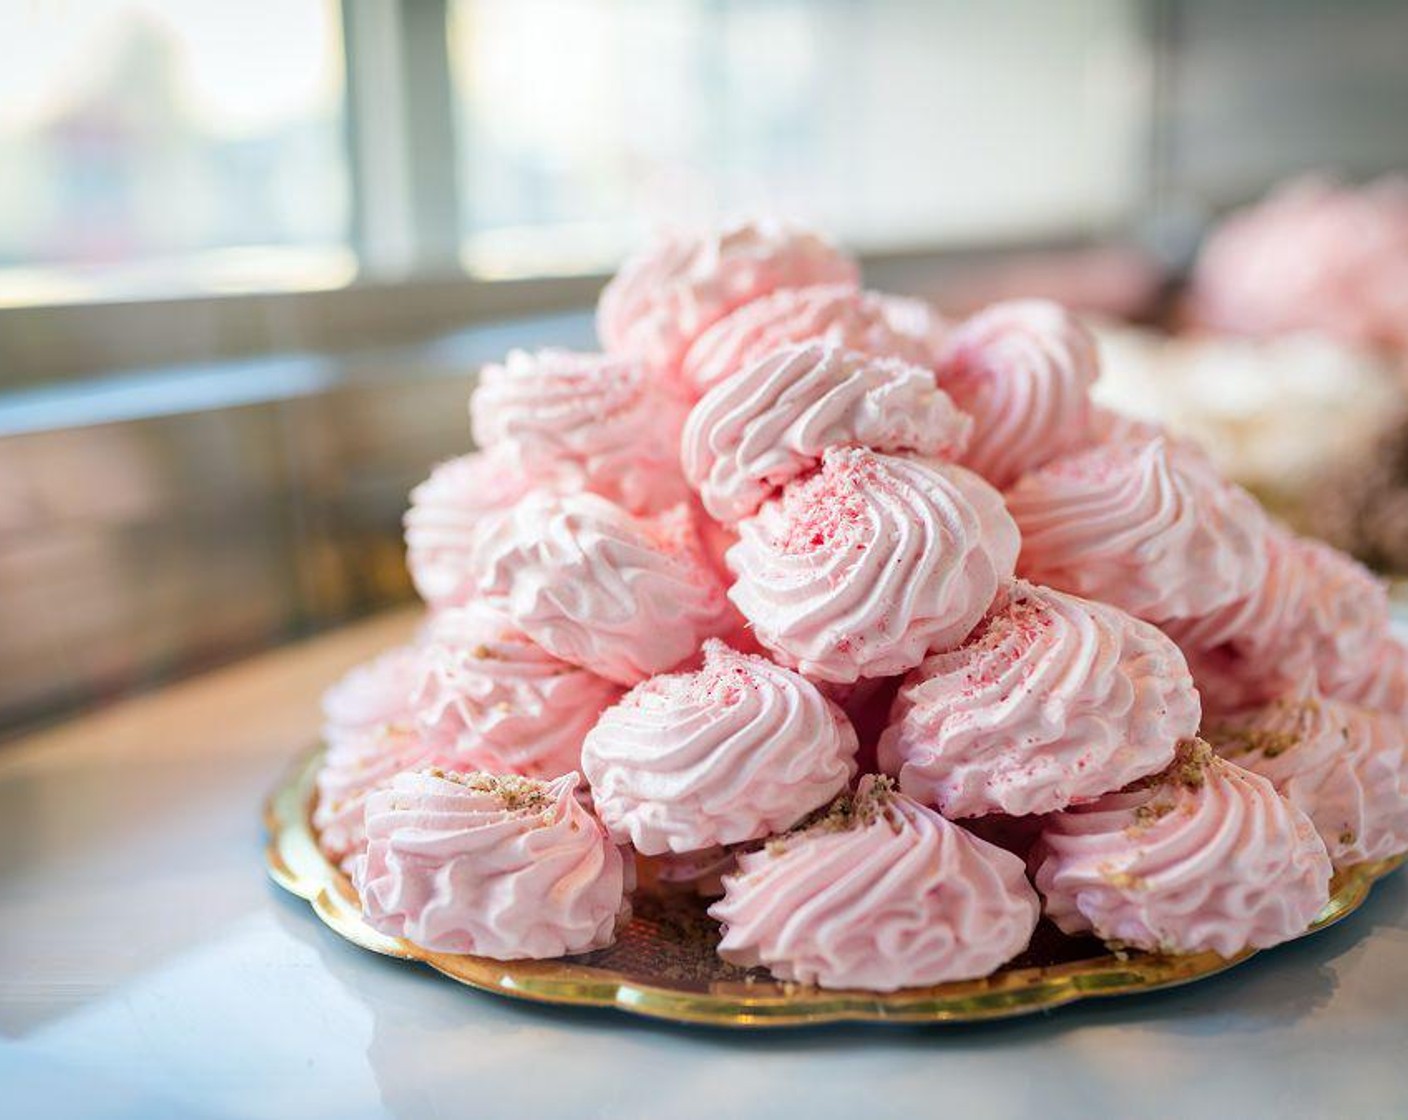 step 5 Let the meringue cool completely on wire racks before serving or storing. Meringues can be kept at room temperature. When stored in an airtight container and placed in a cool, dry place, meringues can stay fresh for 2 weeks.